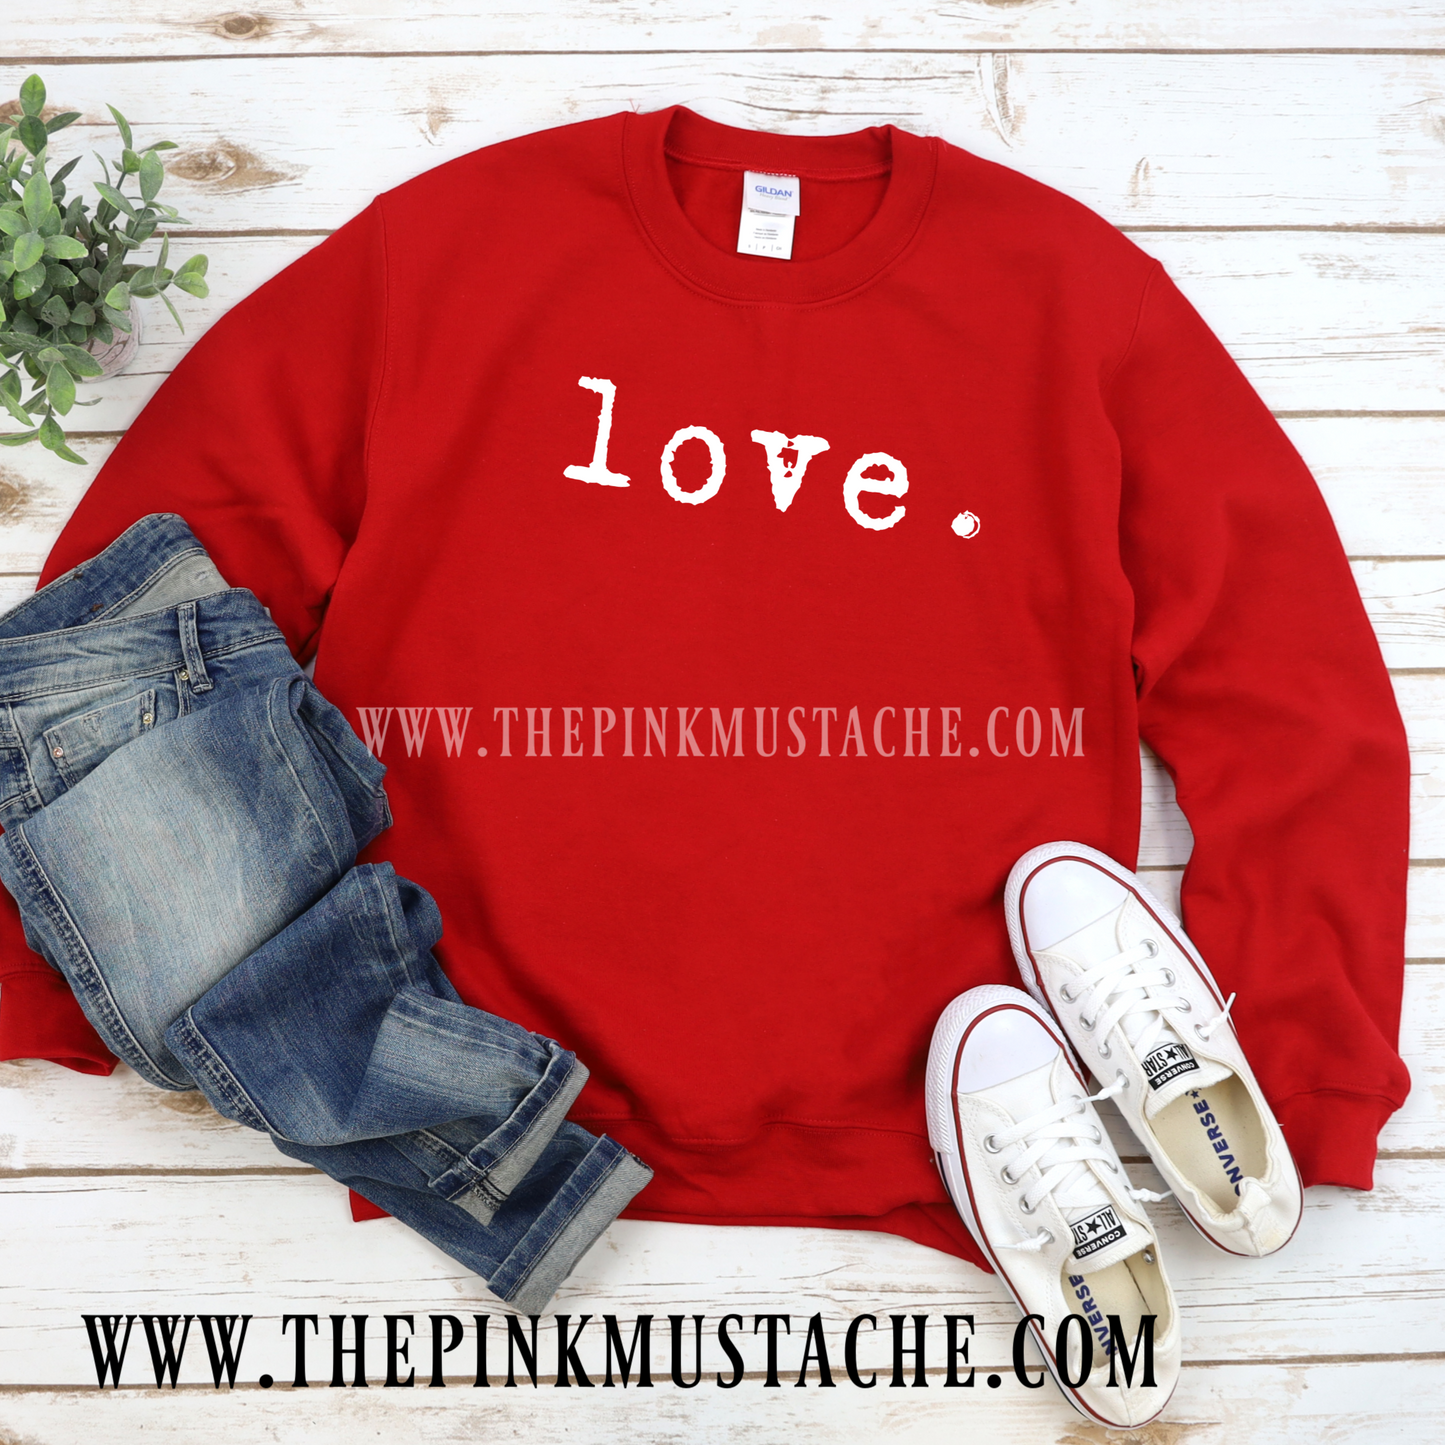 Love Sweatshirt / Valentines Themed Sweatshirt / Love Red Sweatshirt/ Gifts for Her - Mommy and Me